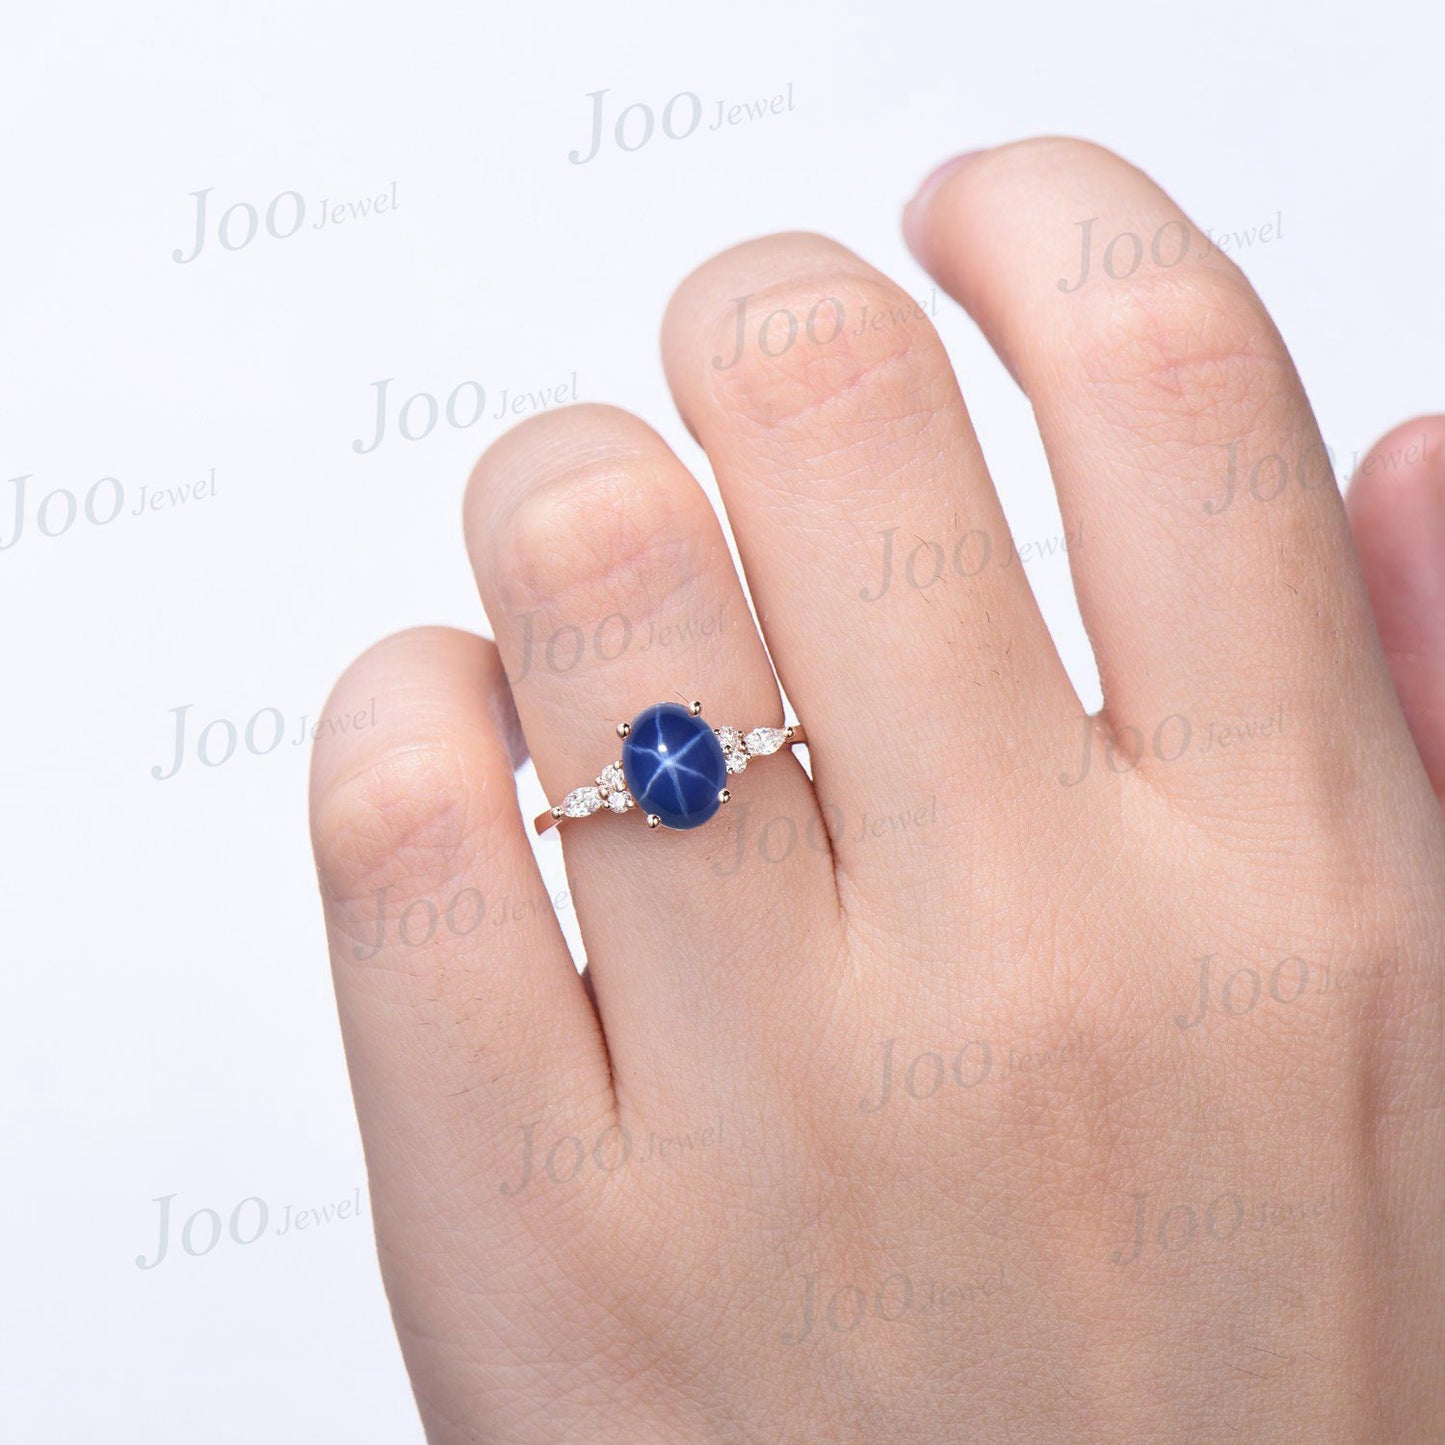 Oval Cut Star Sapphire Engagement Ring Sterling Silver 1.5ct Unique Blue Sapphire Cabochon Wedding Ring Blue Gemstone Jewelry Promise Gift